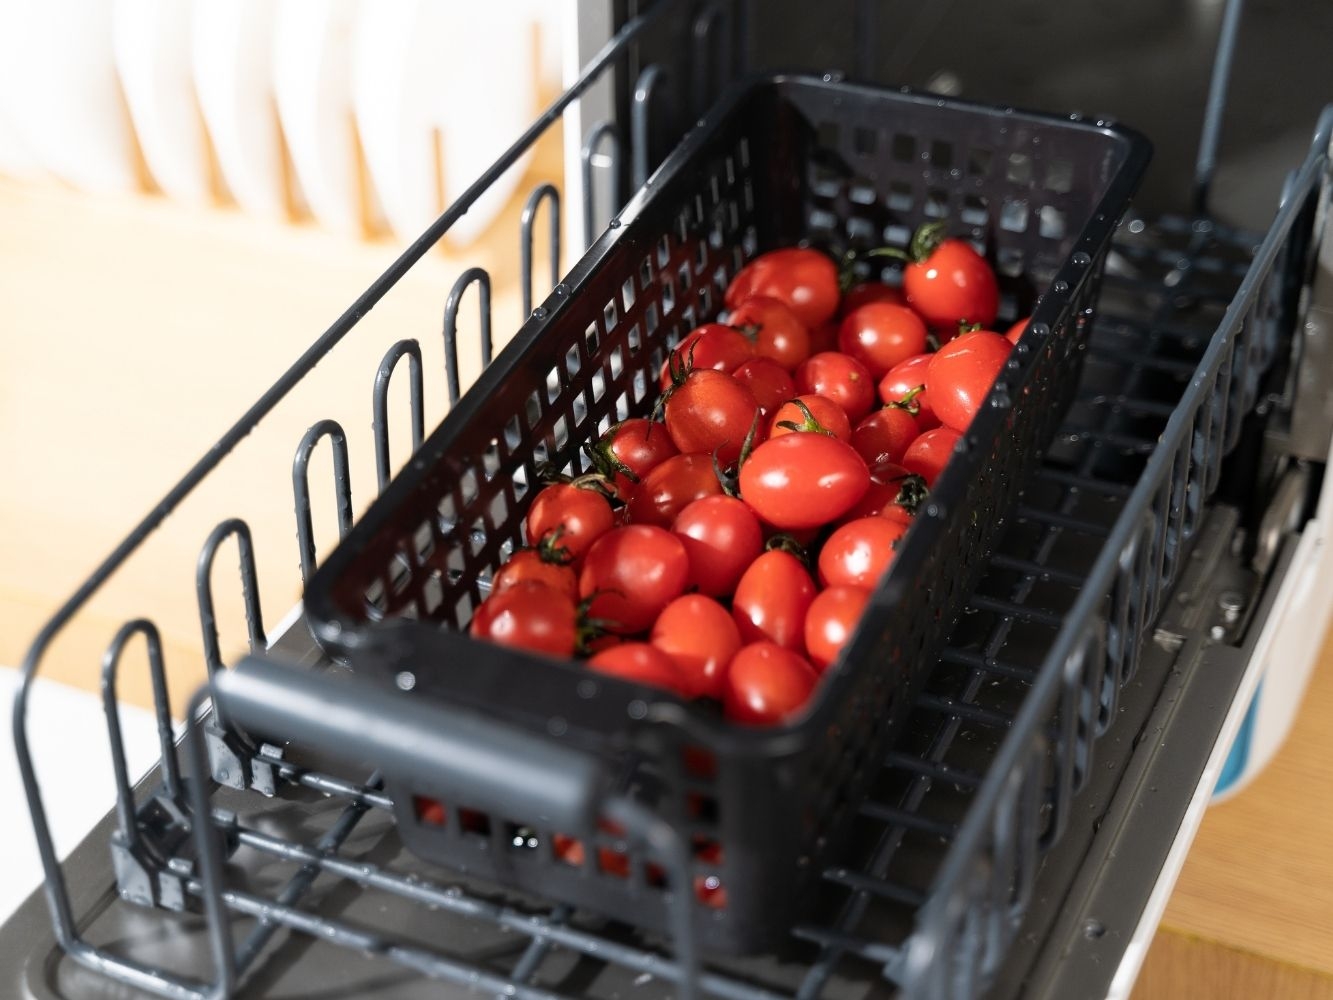 Tomatoes inside the World's Smallest Dishwasher